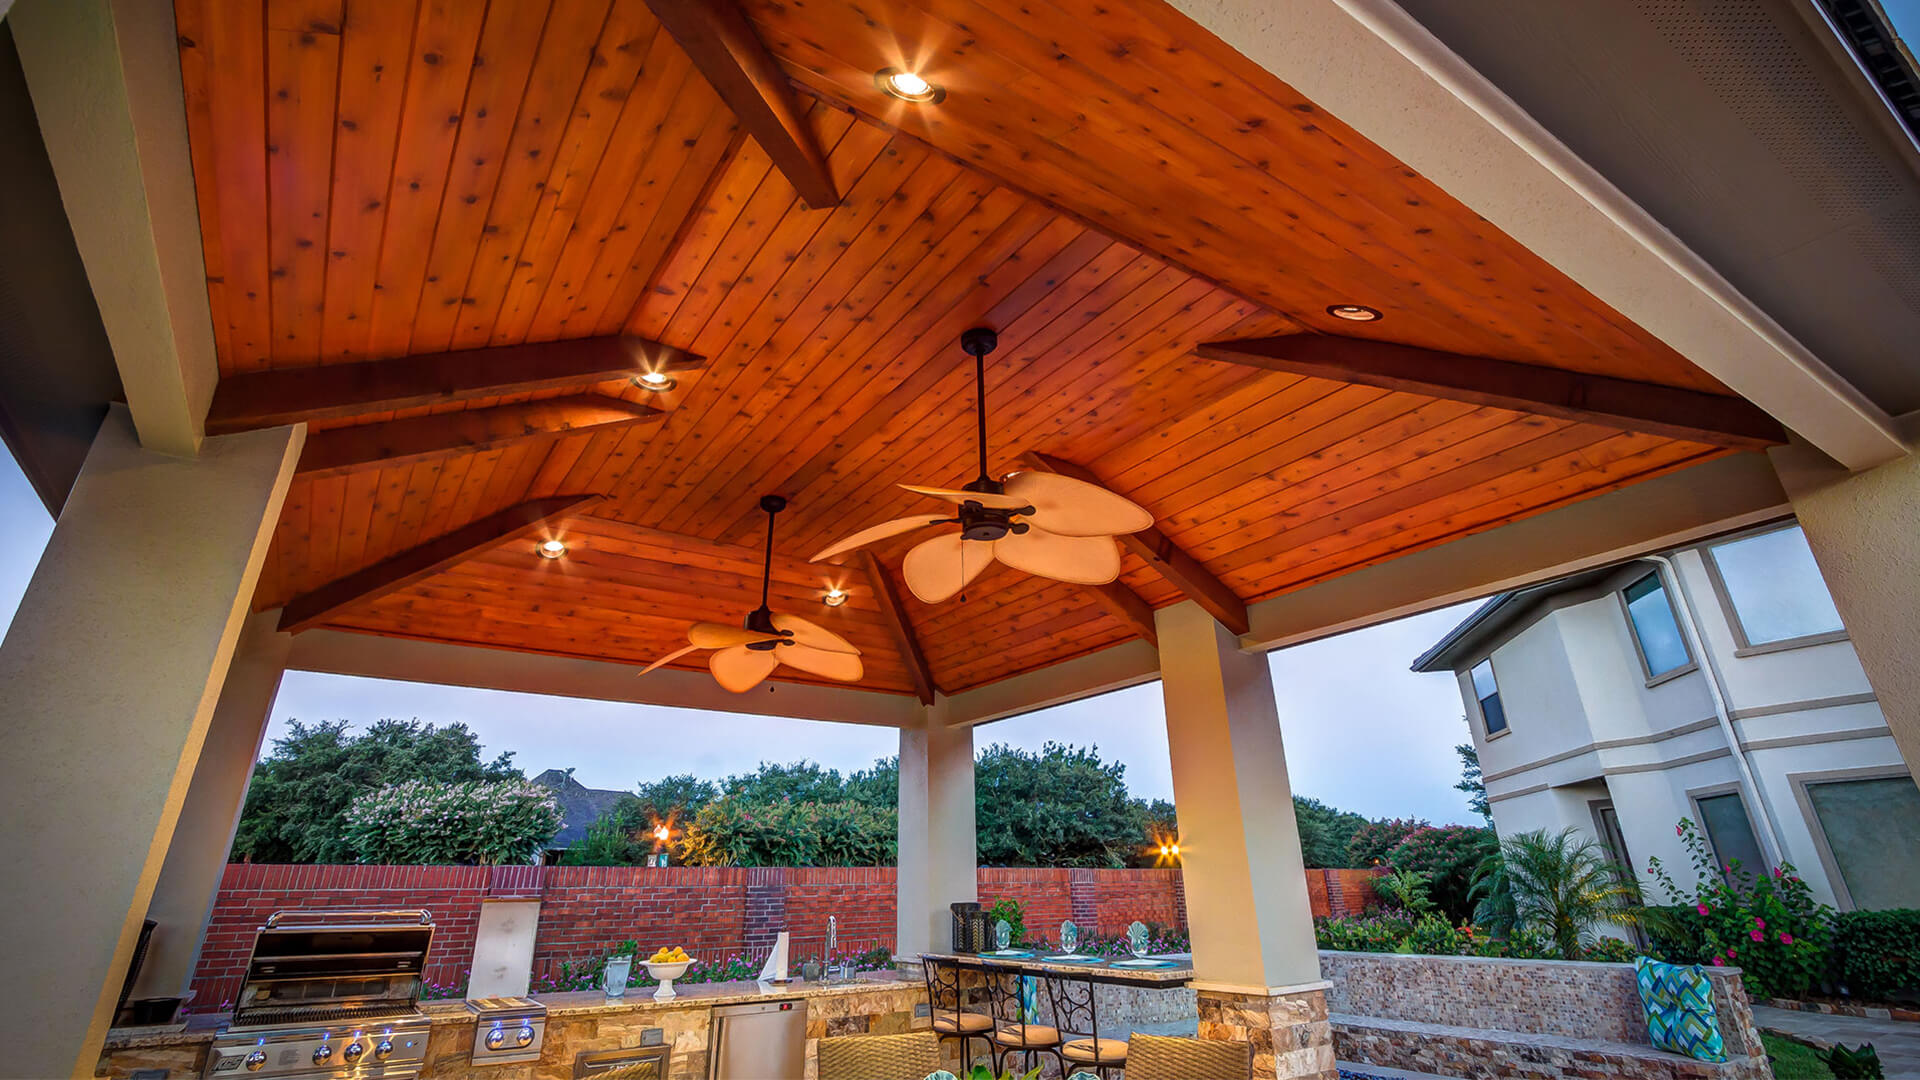 Custom Outdoor Kitchen and Cabana - C edar Ceiling View by Creekstone Outdoor Living in Houston Texas